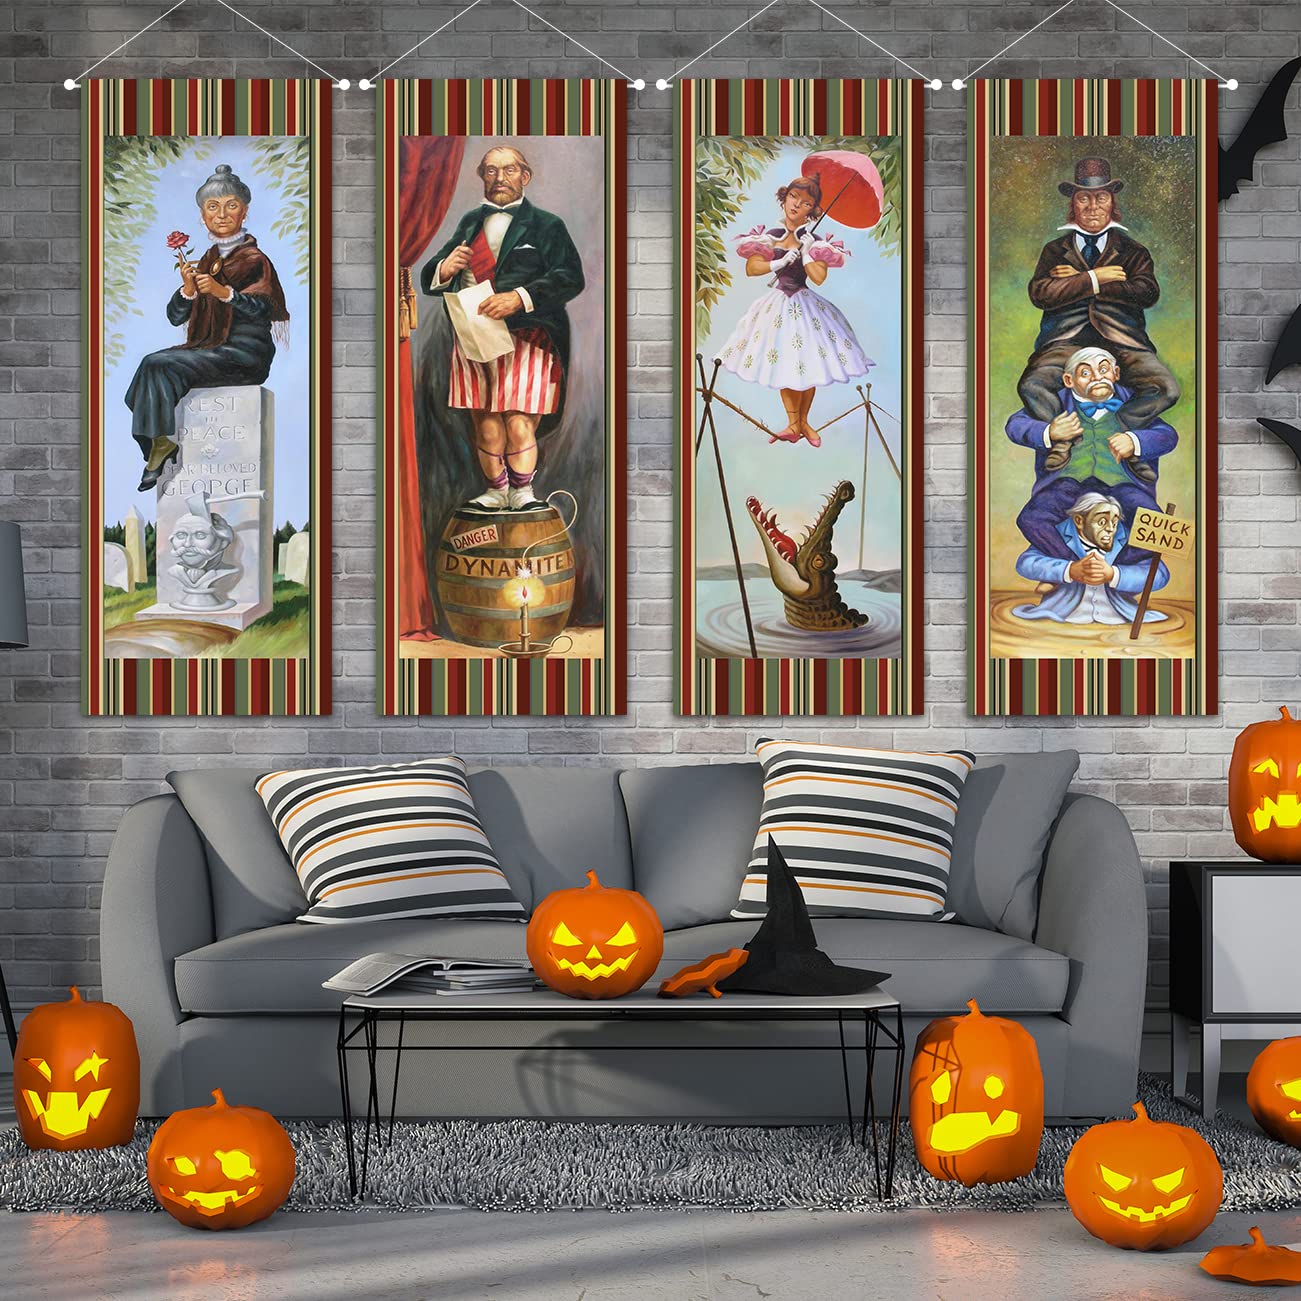 Large set of 4 Haunted Mansion Stretching Portraits Outdoor Vinyl Halloween Decoration, Haunted Mansion Backdrop Halloween Vintage Horror Poster for Home Wall Decor Art Photo Hanging Banner